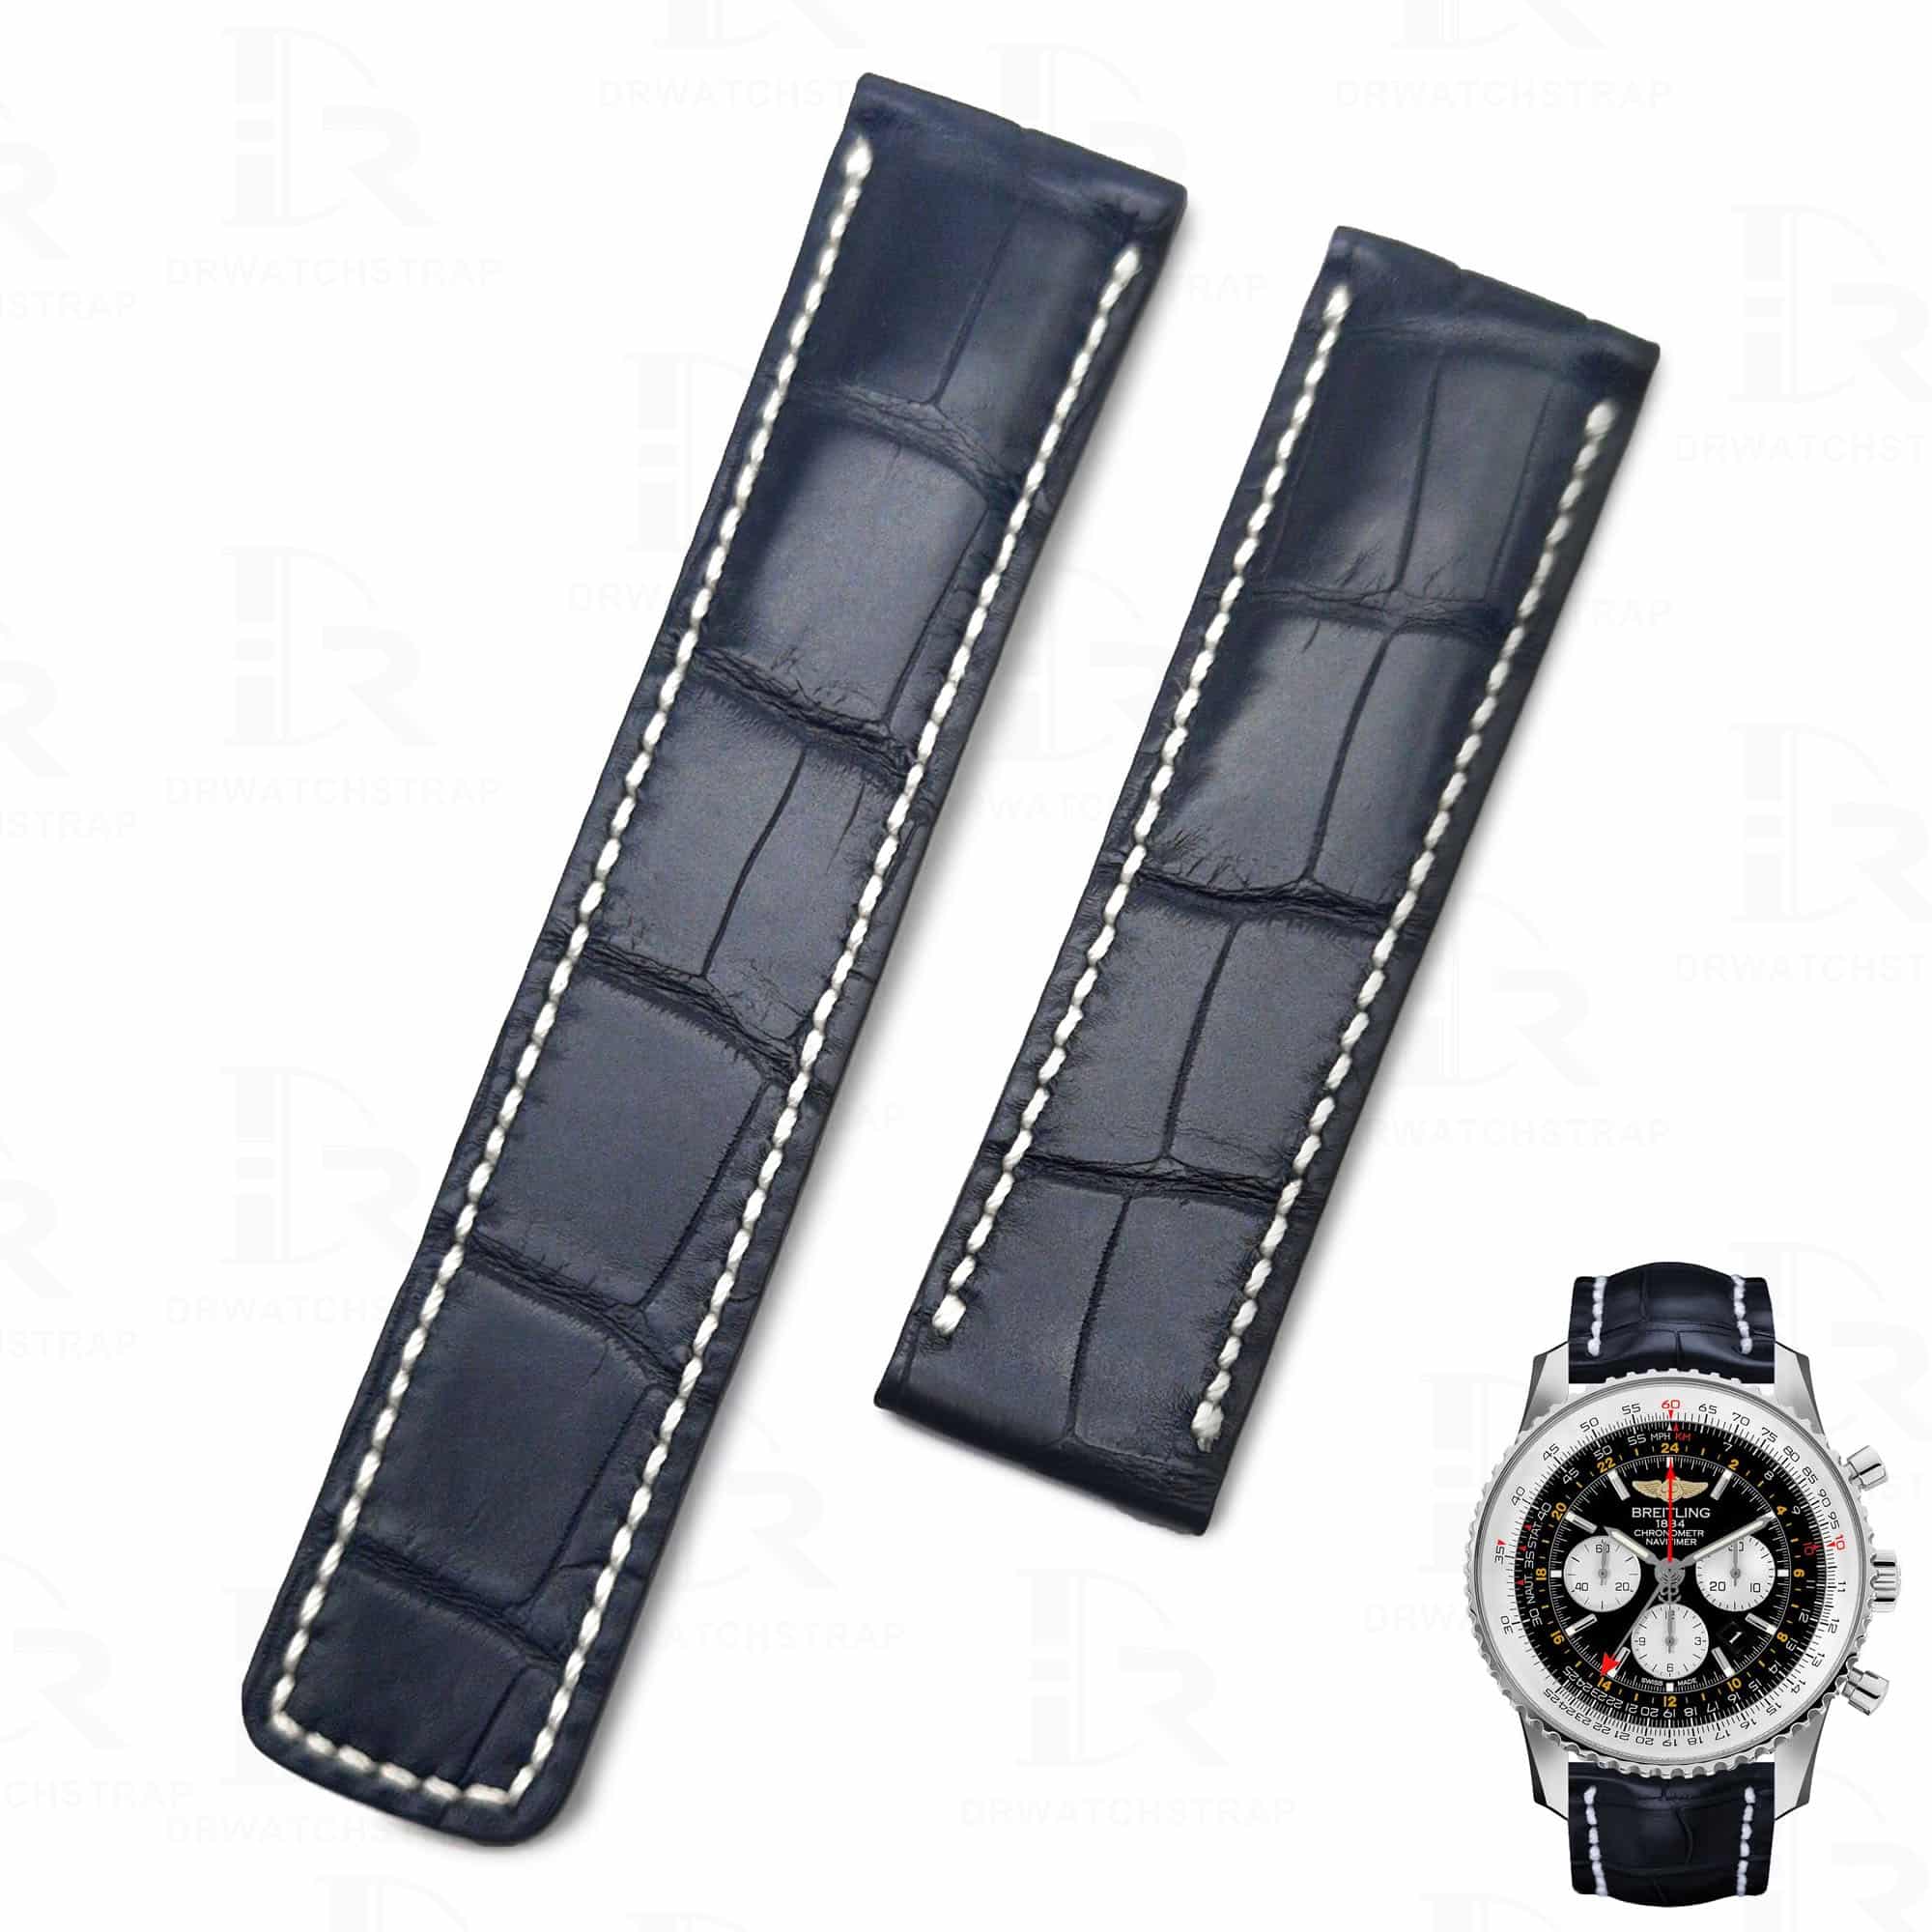 Genuine alligator blue leather watch strap replacement for Breitling Navitimer